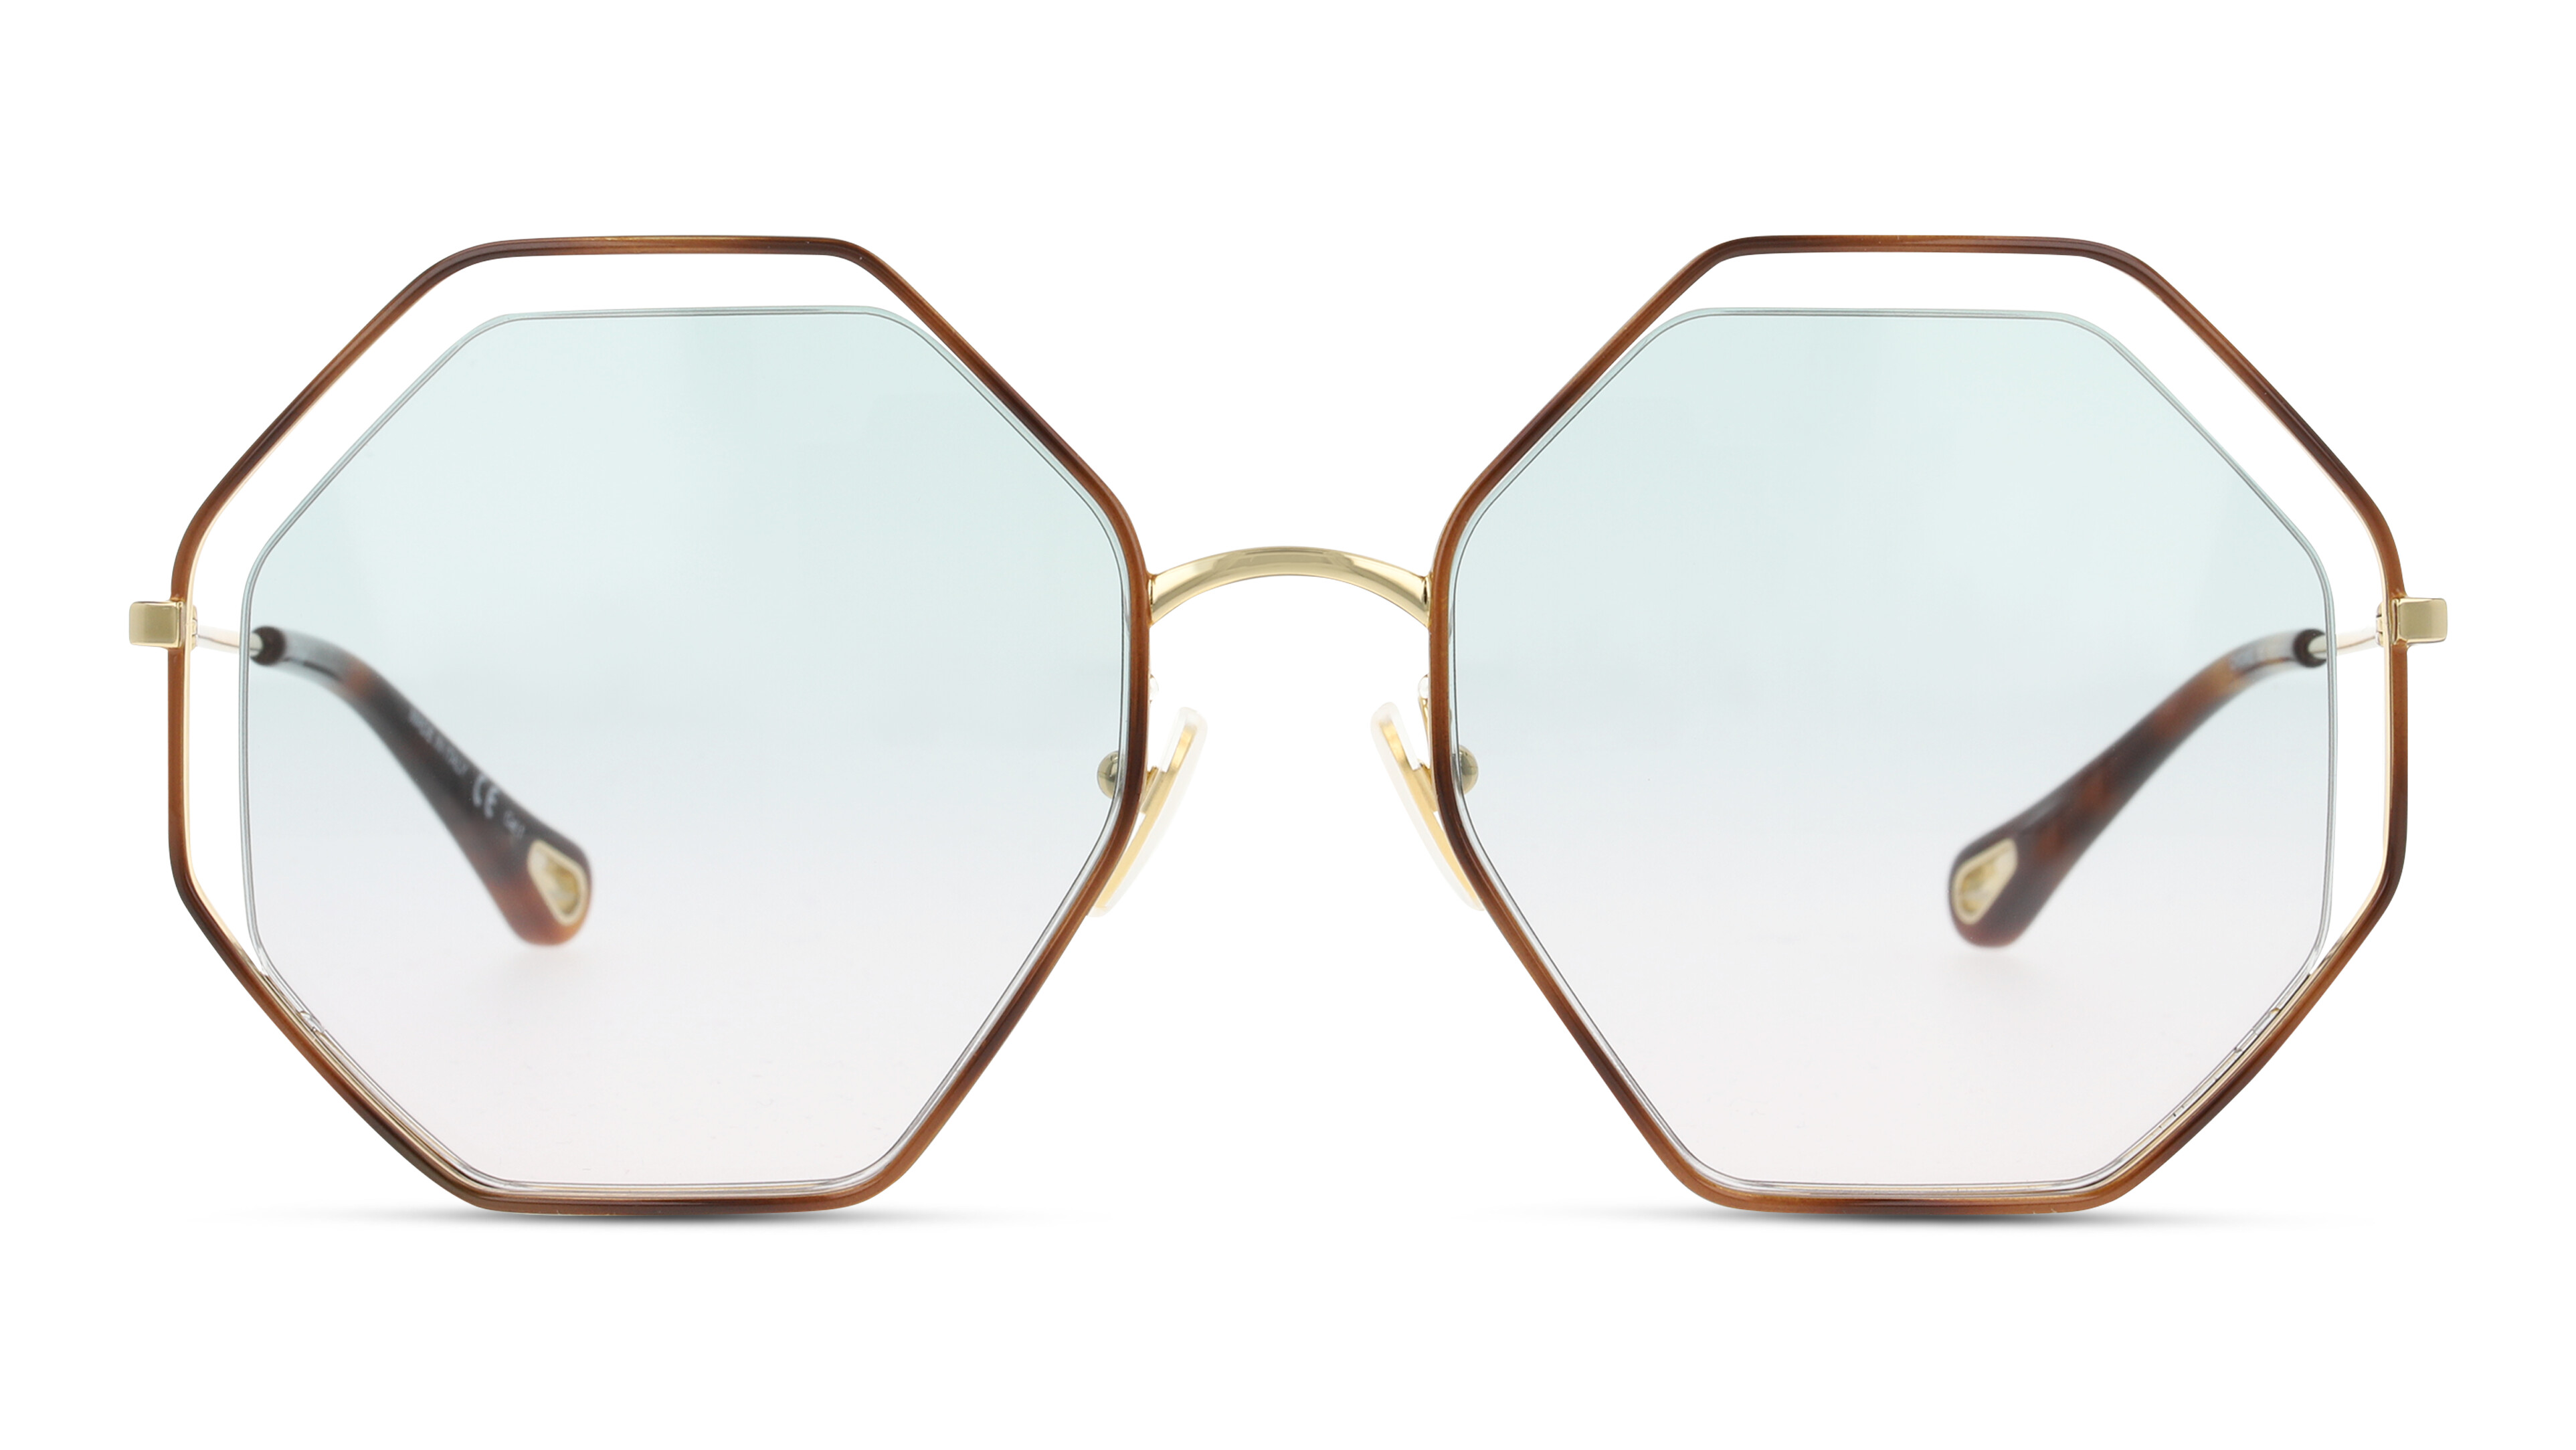 [products.image.front] Chloe CH0046S 002 Sonnenbrille